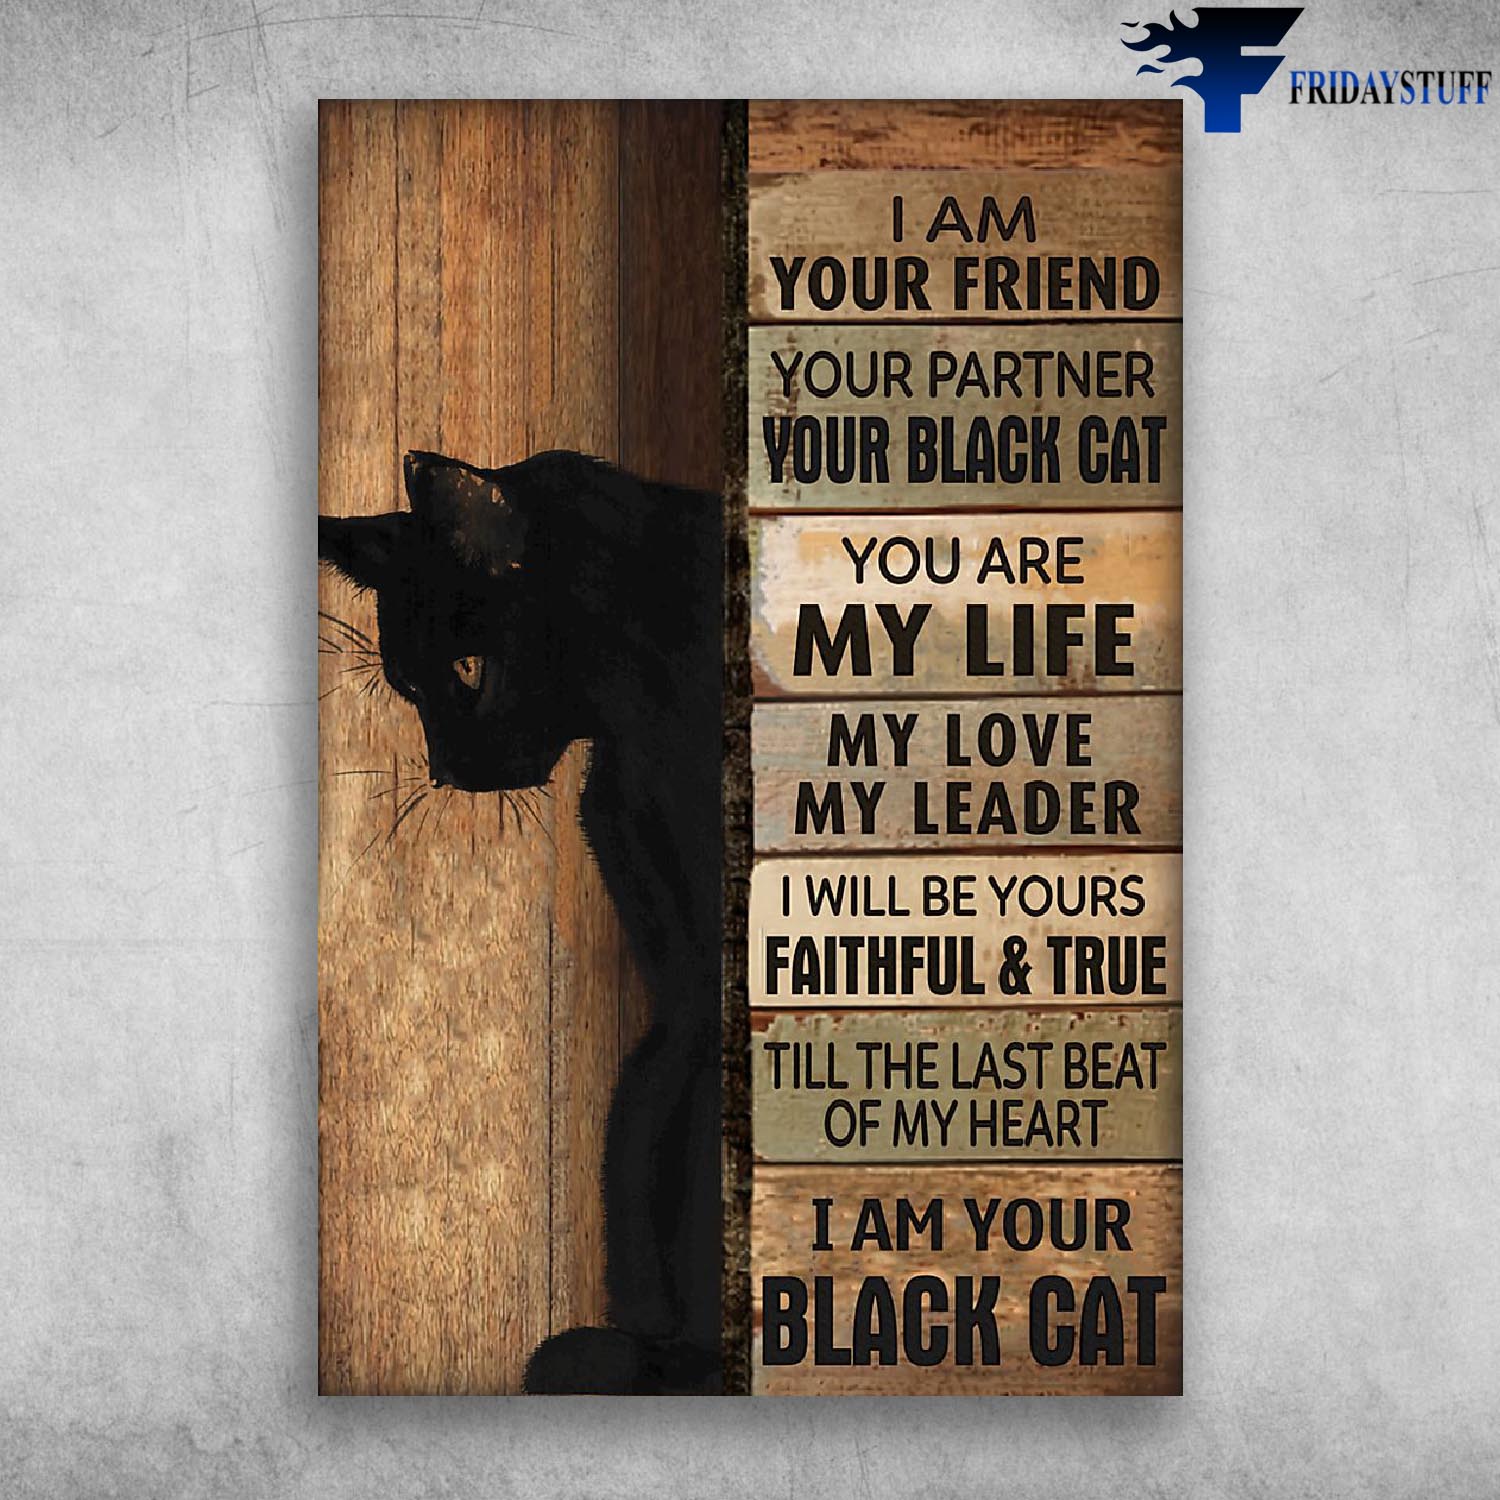 I Am Your Friend, Your Partner your Black Cat, You Are My Life